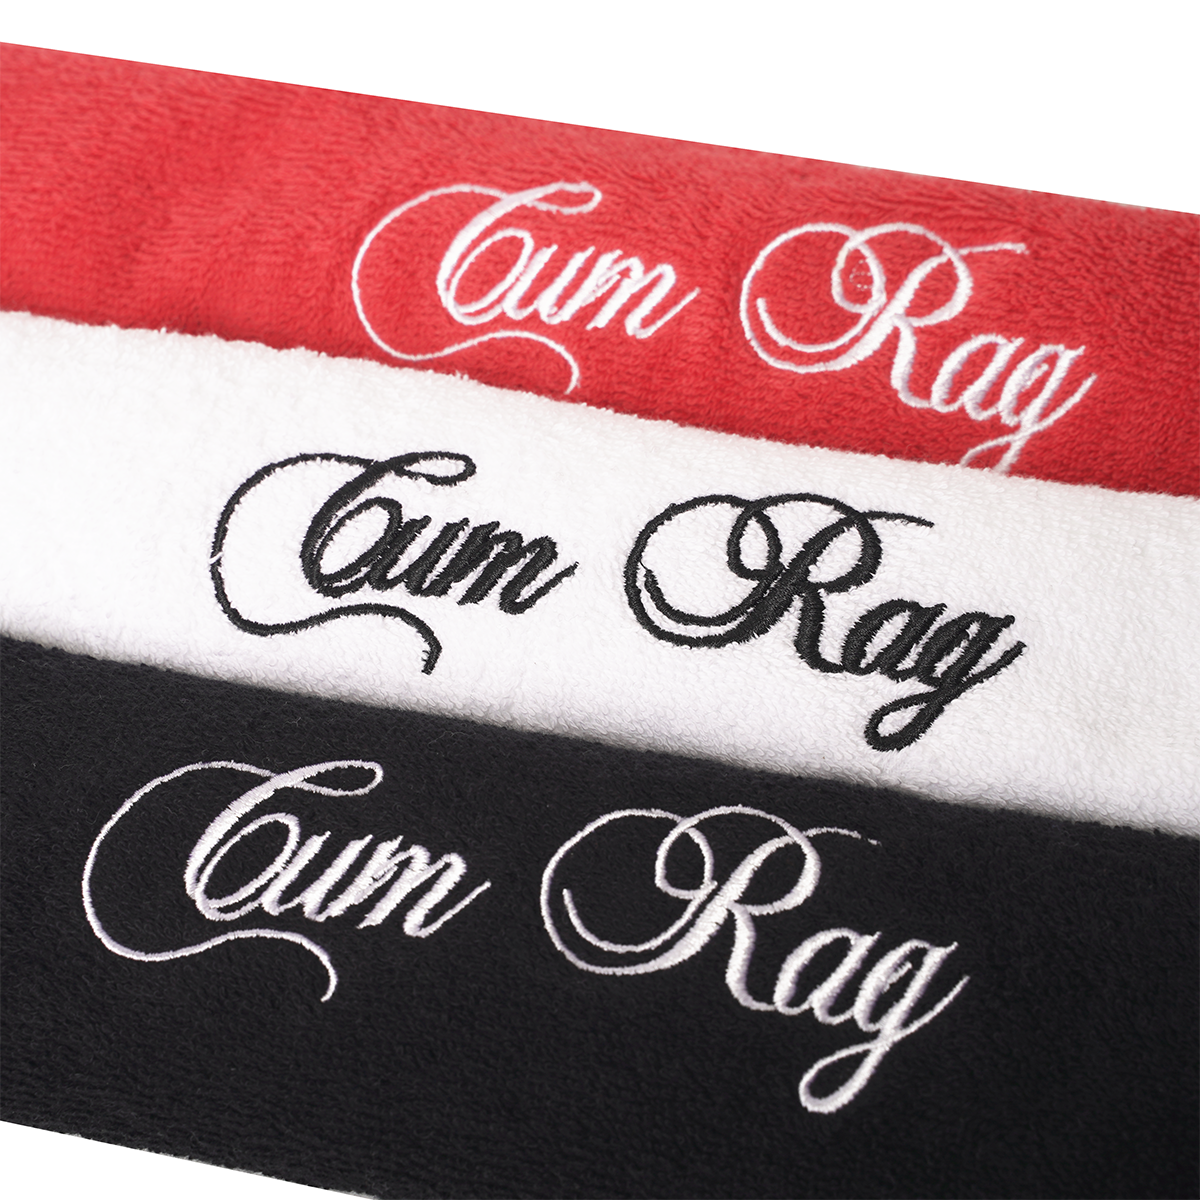 GOOD CATCH Cum Towel and Cum Rag Black or White Wholesale Prices Same Day  Shipping